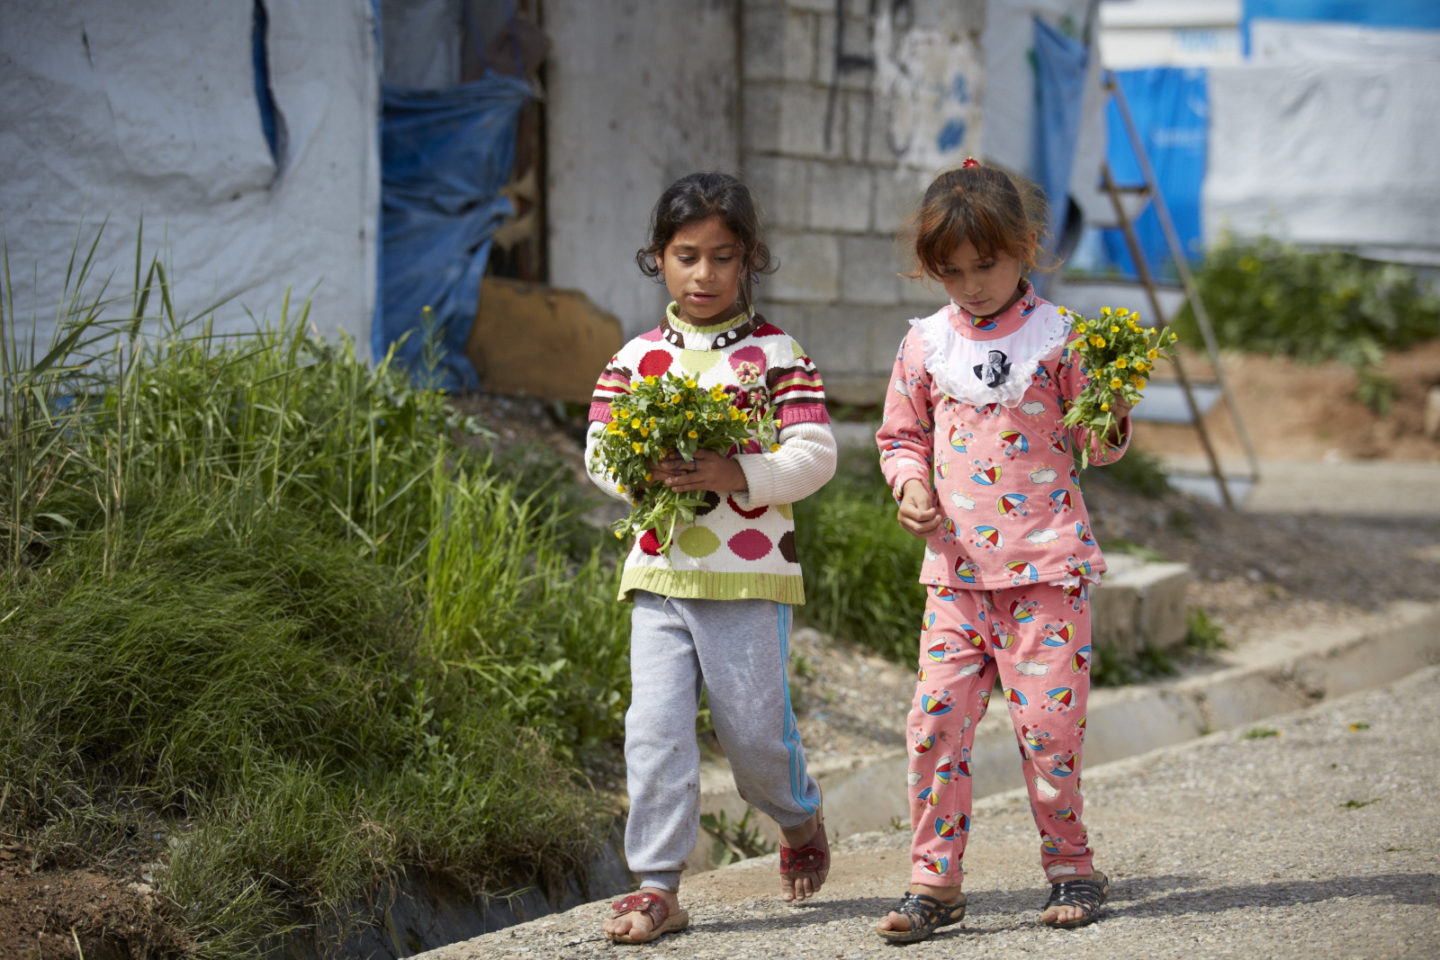 Two girls carrying flowers